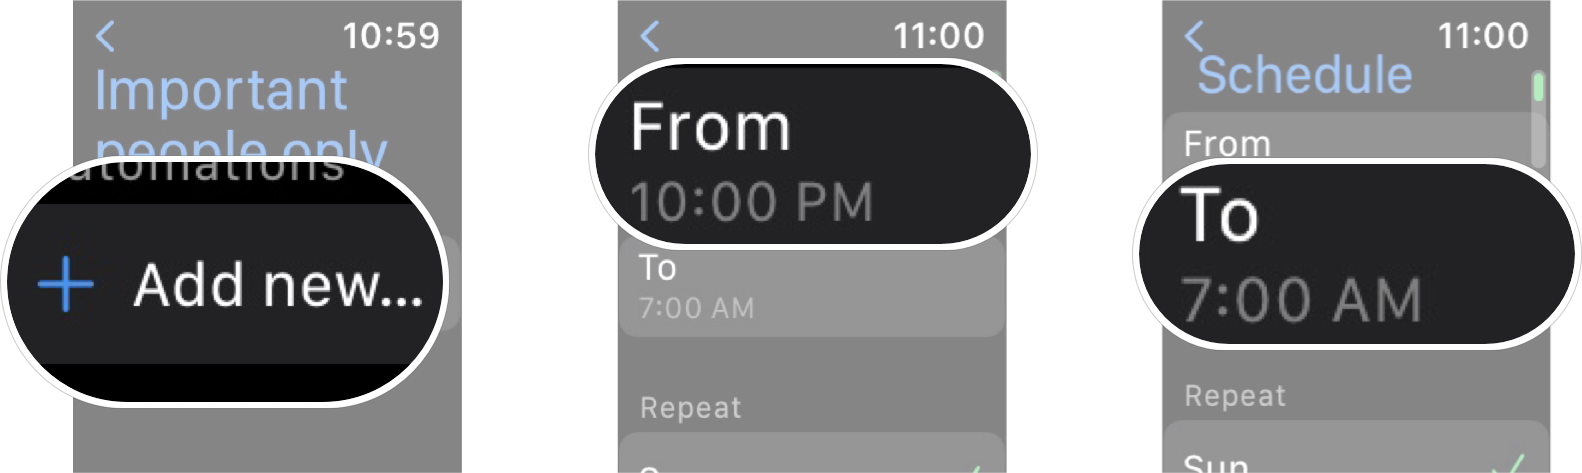 How To Create Custom Schedule For Focus In watchOS 8: Tap Add new, tap from to set the start time, and then tap To to set the end time.